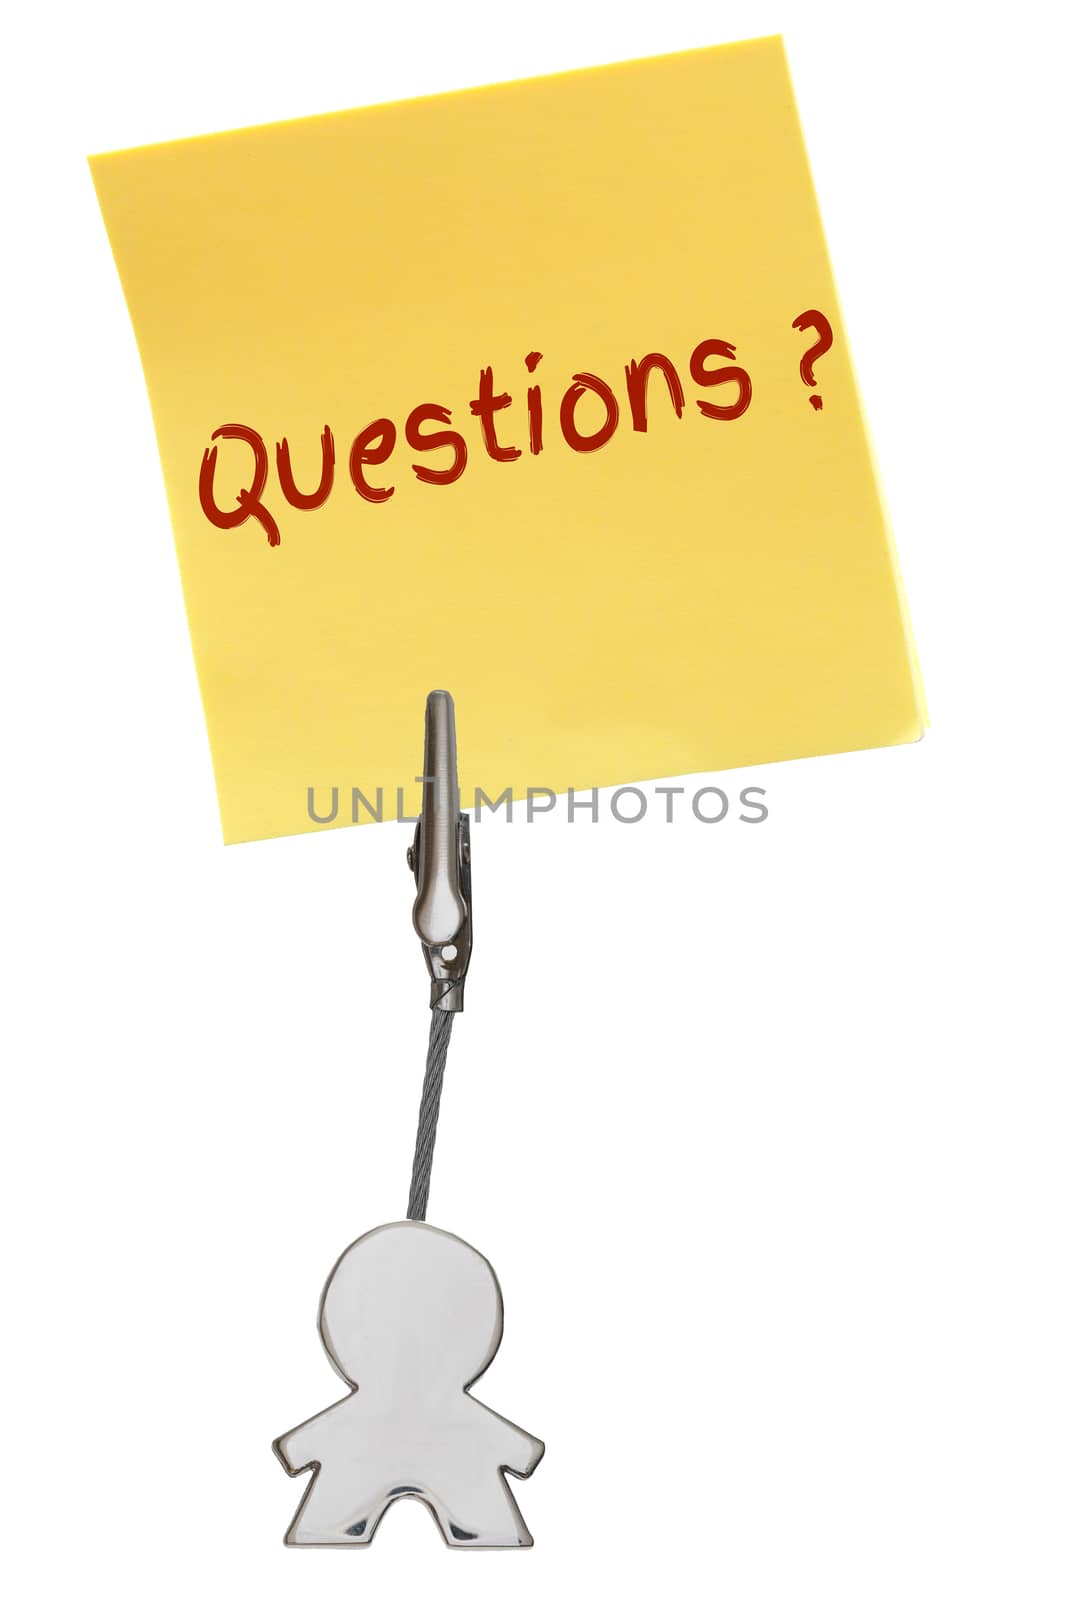 Man Figure Business Card Holder with clip holding a yellow paper note QUESTIONS; isolated on white background, customizable